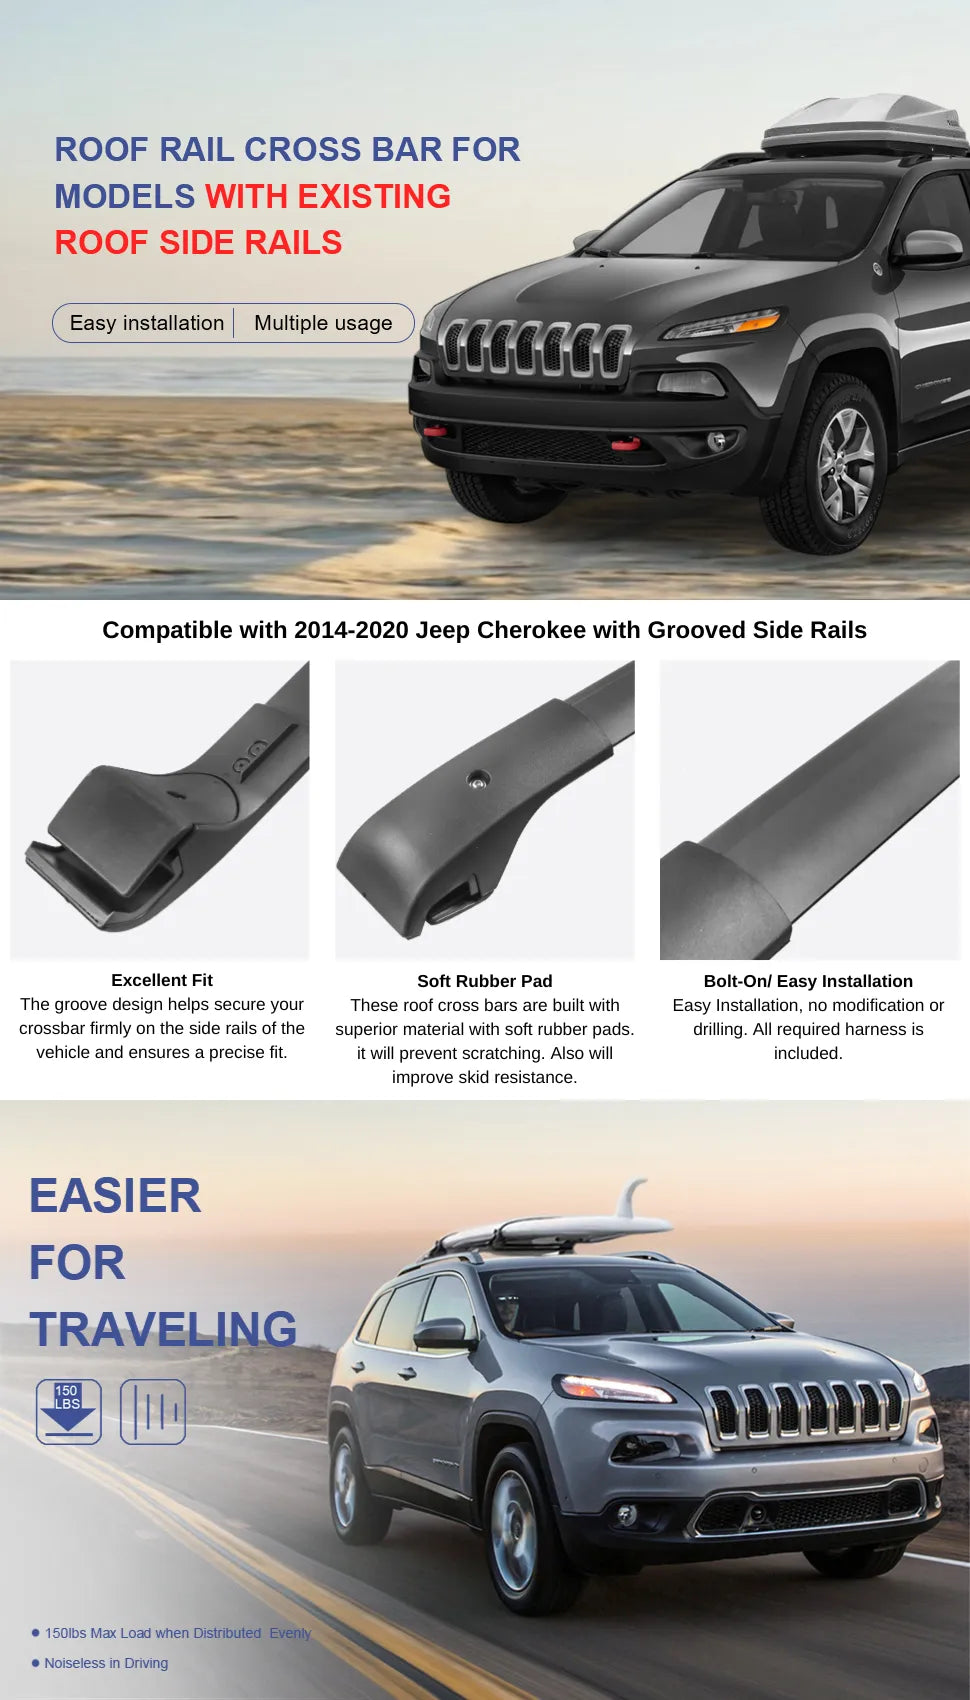 Roof Rack Cross Bar For 2014-2020 Jeep Cherokee with Grooved Side Rails